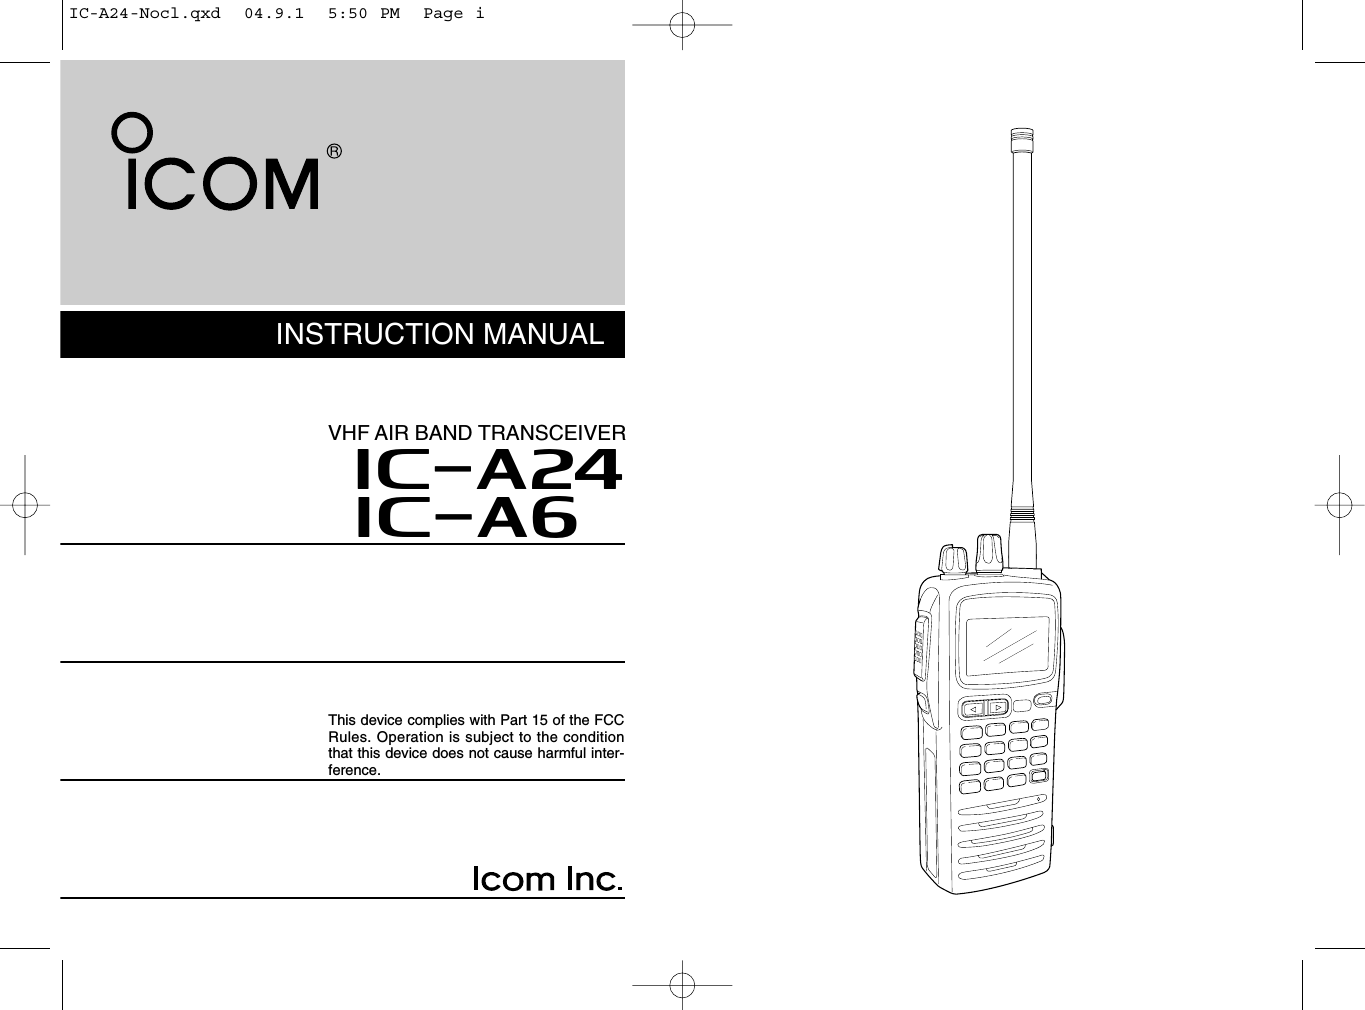 INSTRUCTION MANUALiA6iA24VHF AIR BAND TRANSCEIVERThis device complies with Part 15 of the FCCRules. Operation is subject to the conditionthat this device does not cause harmful inter-ference.IC-A24-Nocl.qxd  04.9.1  5:50 PM  Page i